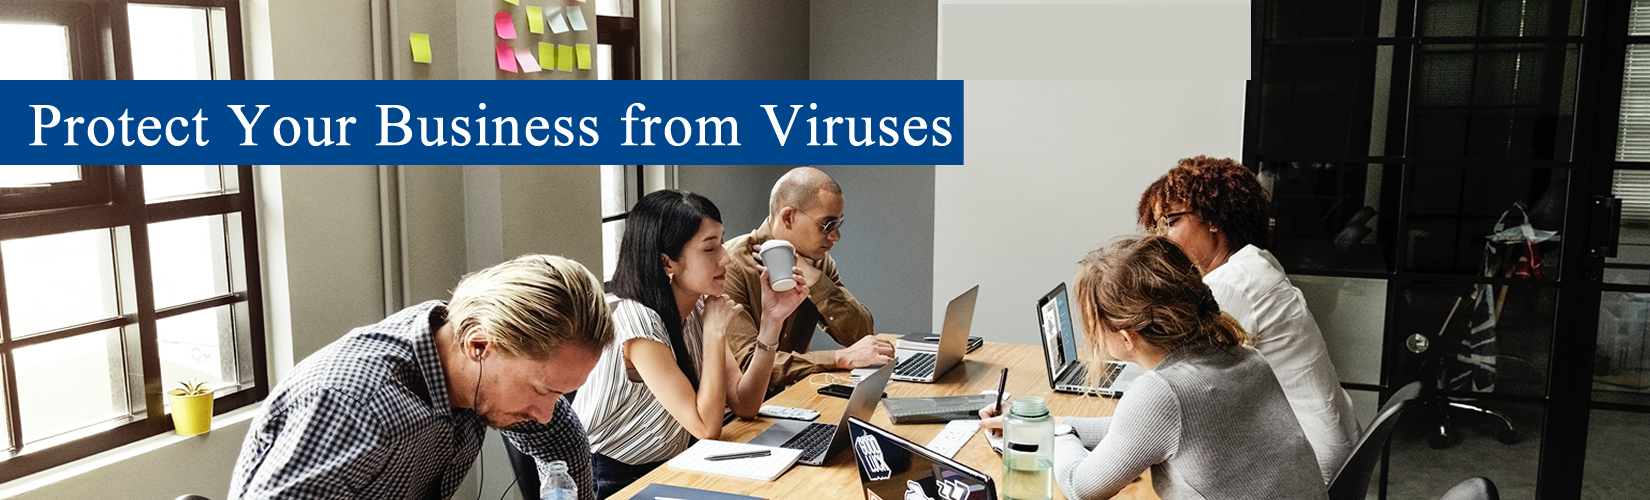 Protect Your Business from Computer Viruses | Second Creek Technologies